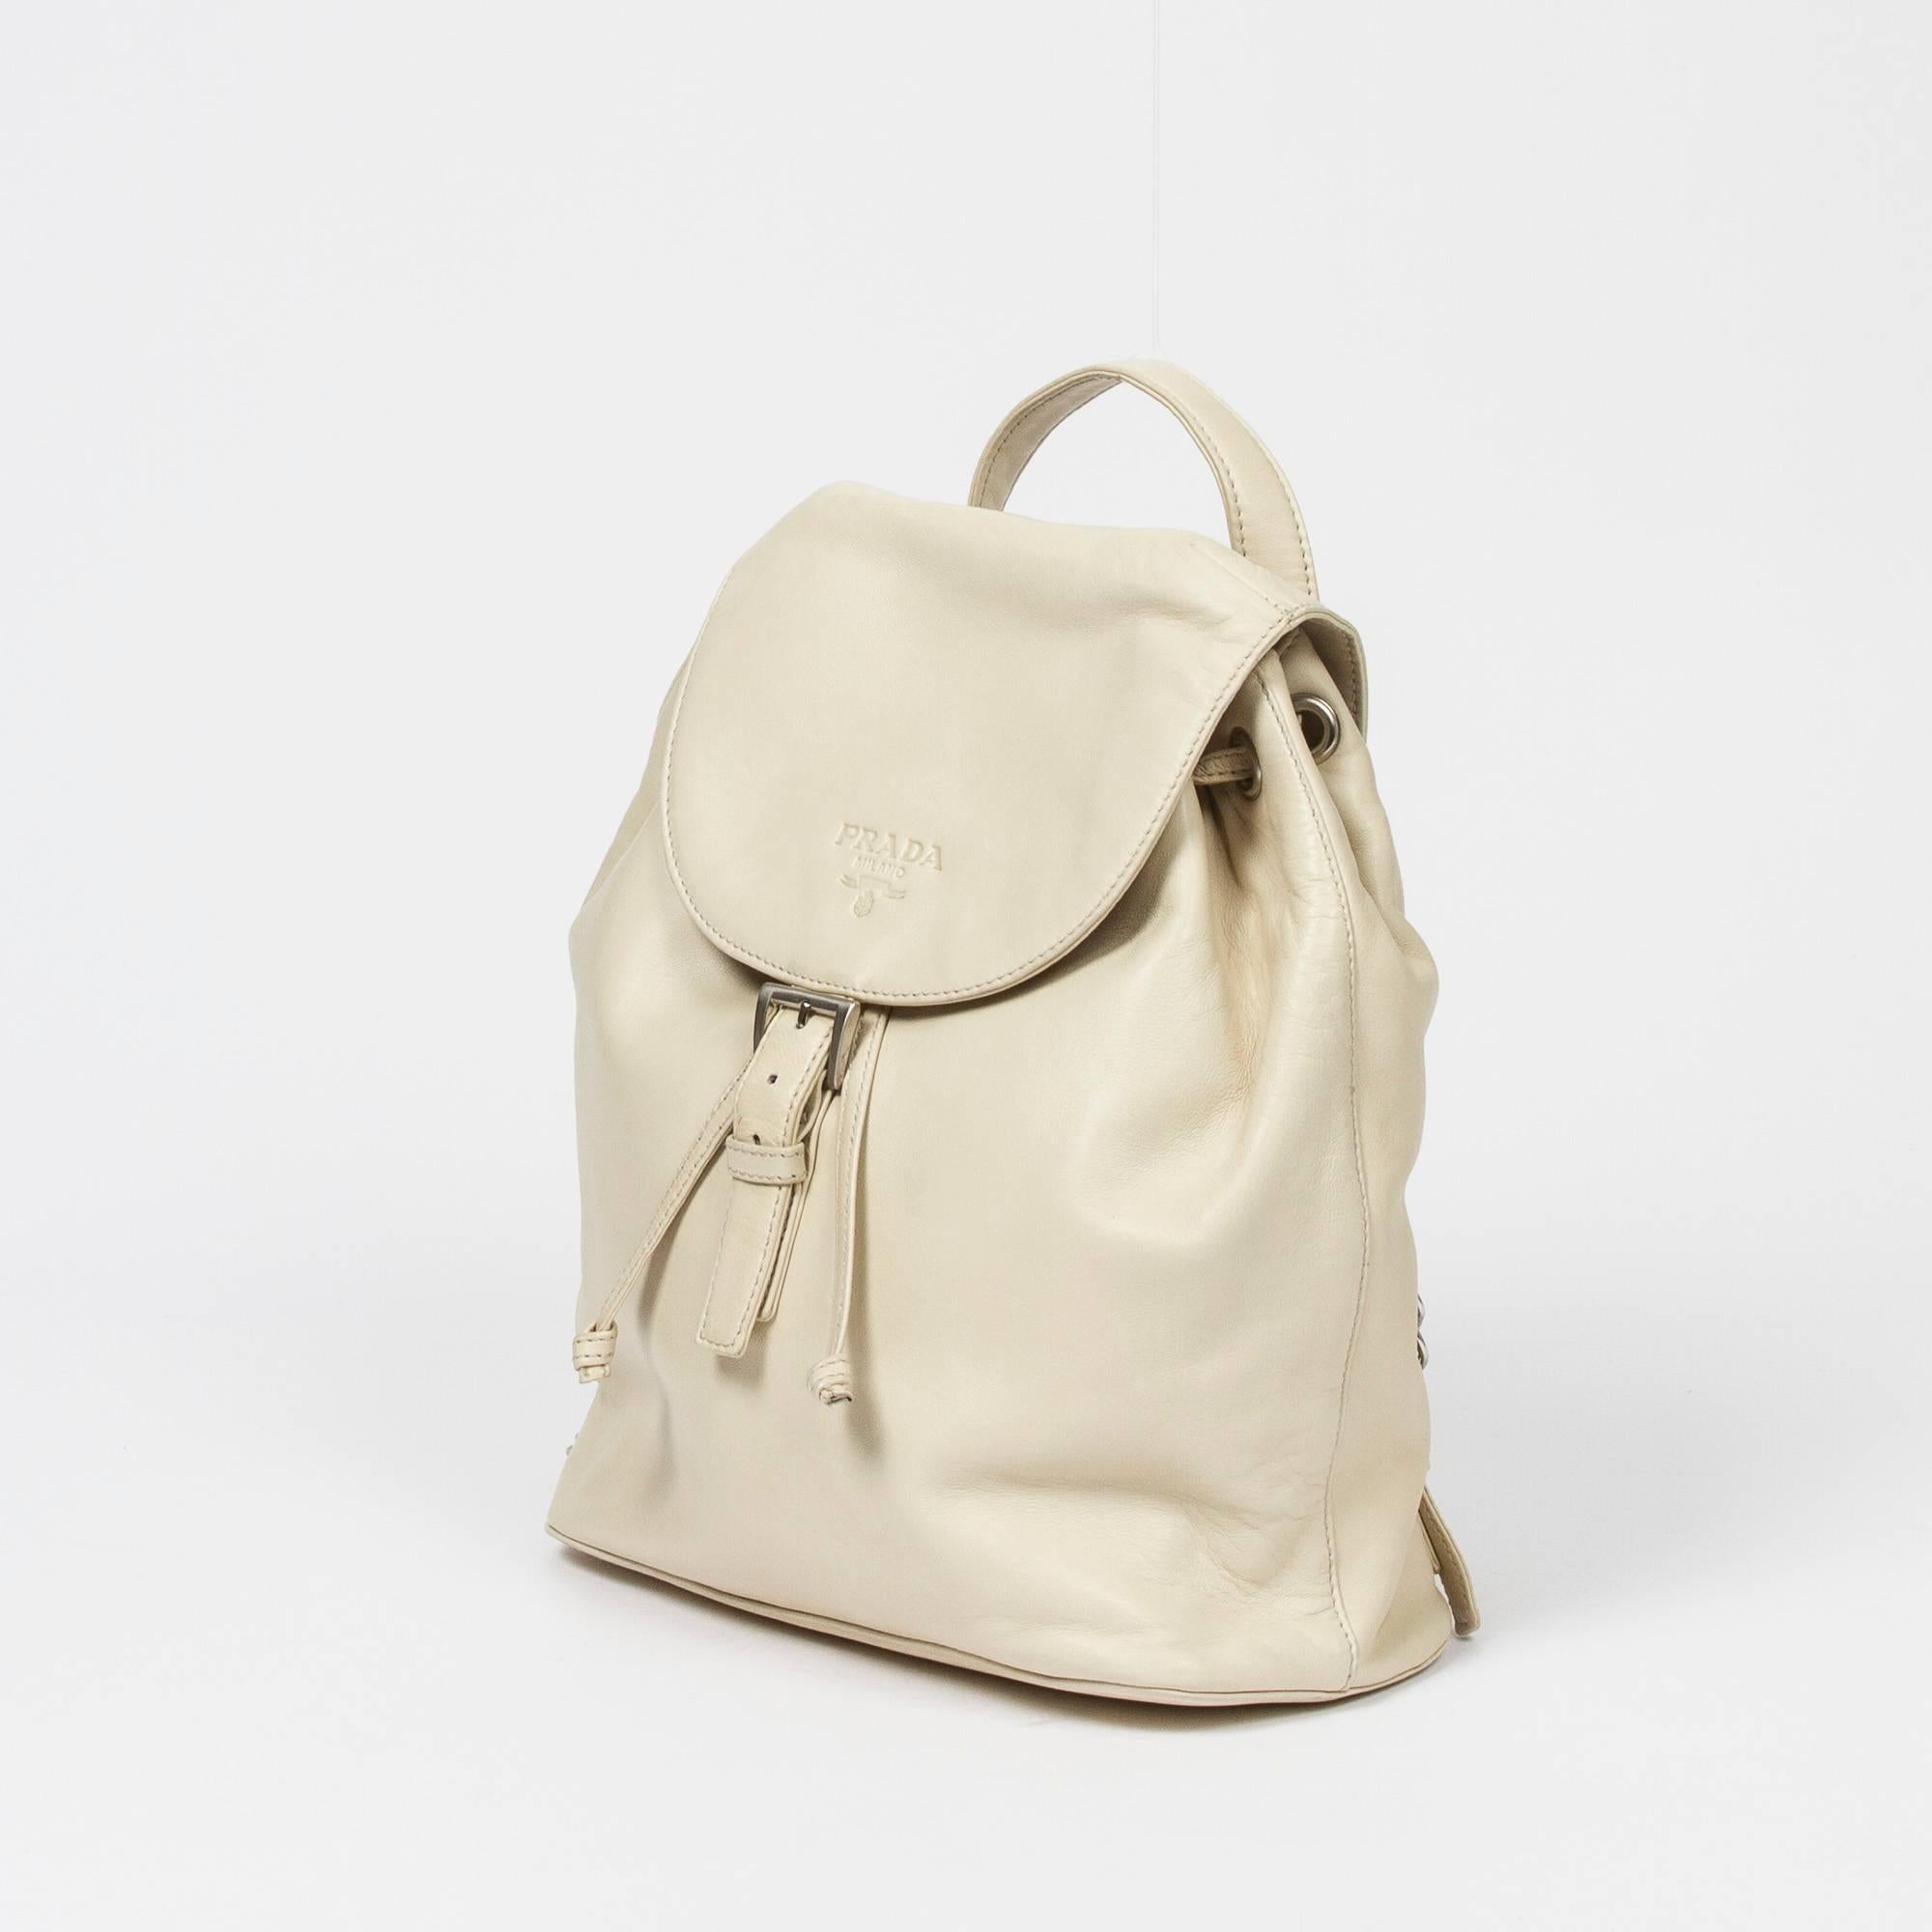 Backpack in Ivory calf leather, with Chain Interlaced With Ivory Leather, silver hardware. Excellent condition.
